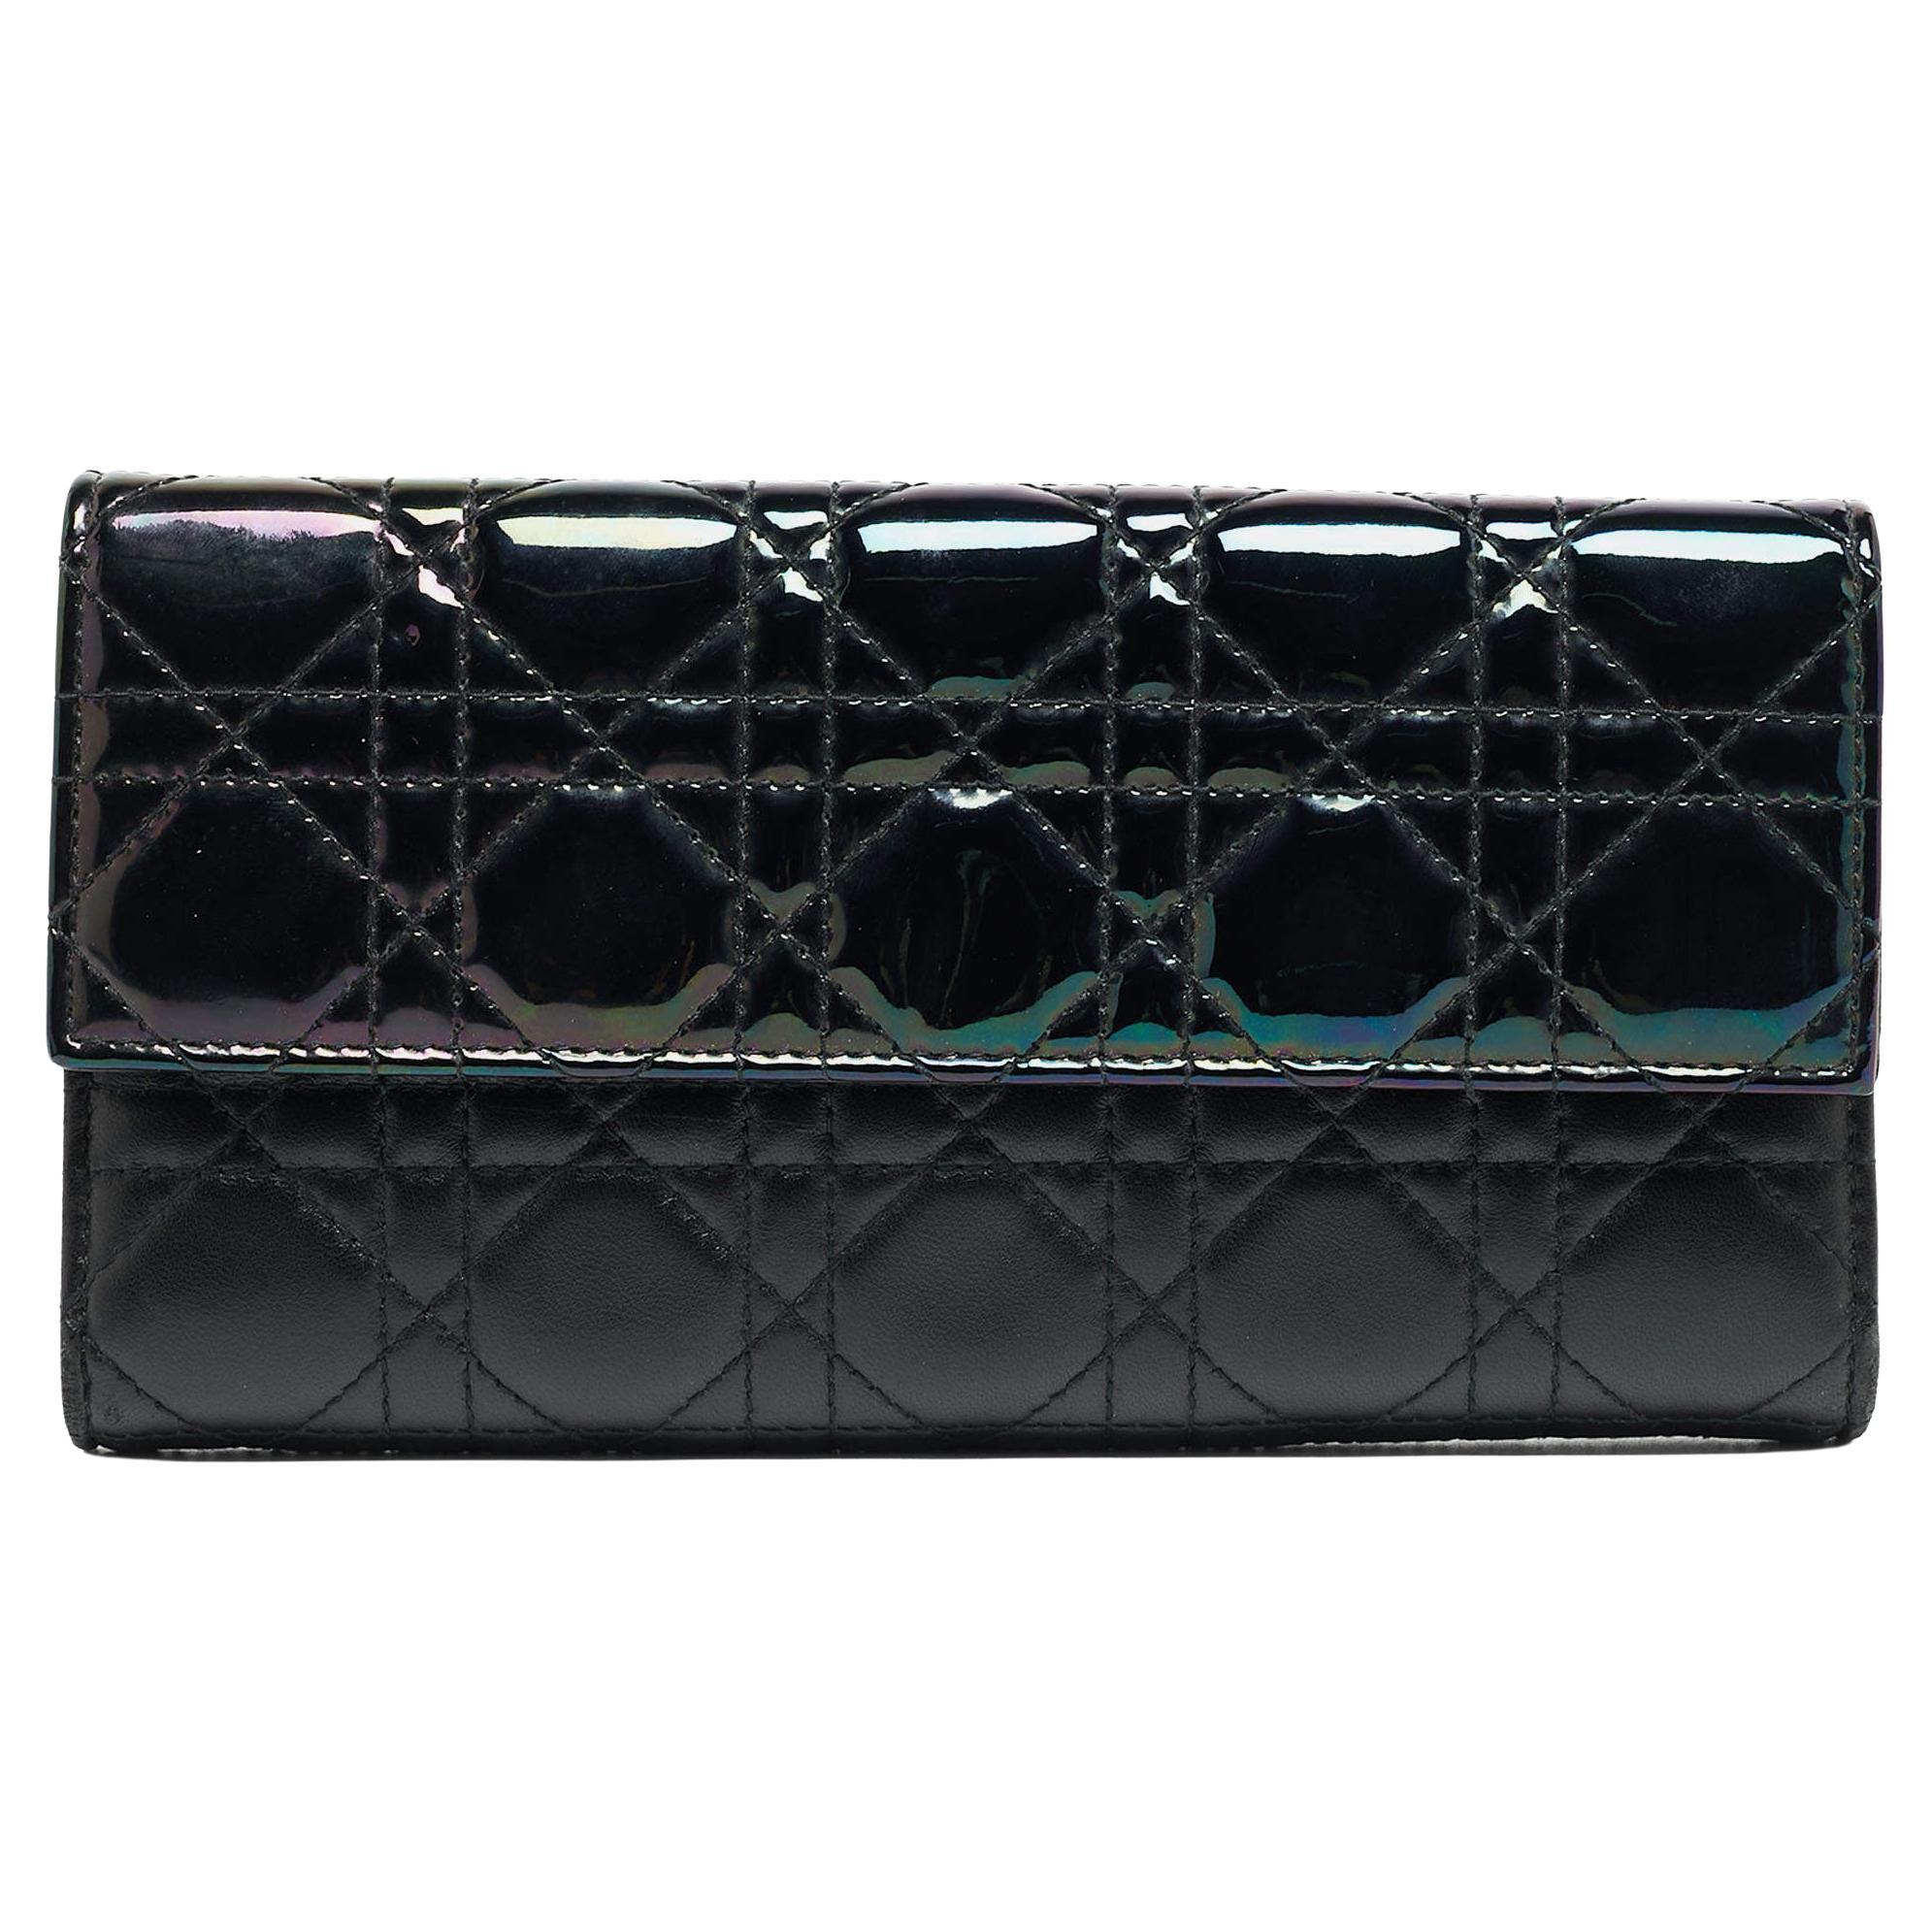 Dior Black Iridescent Cannage Patent and Leather Lady Dior Flap Wallet